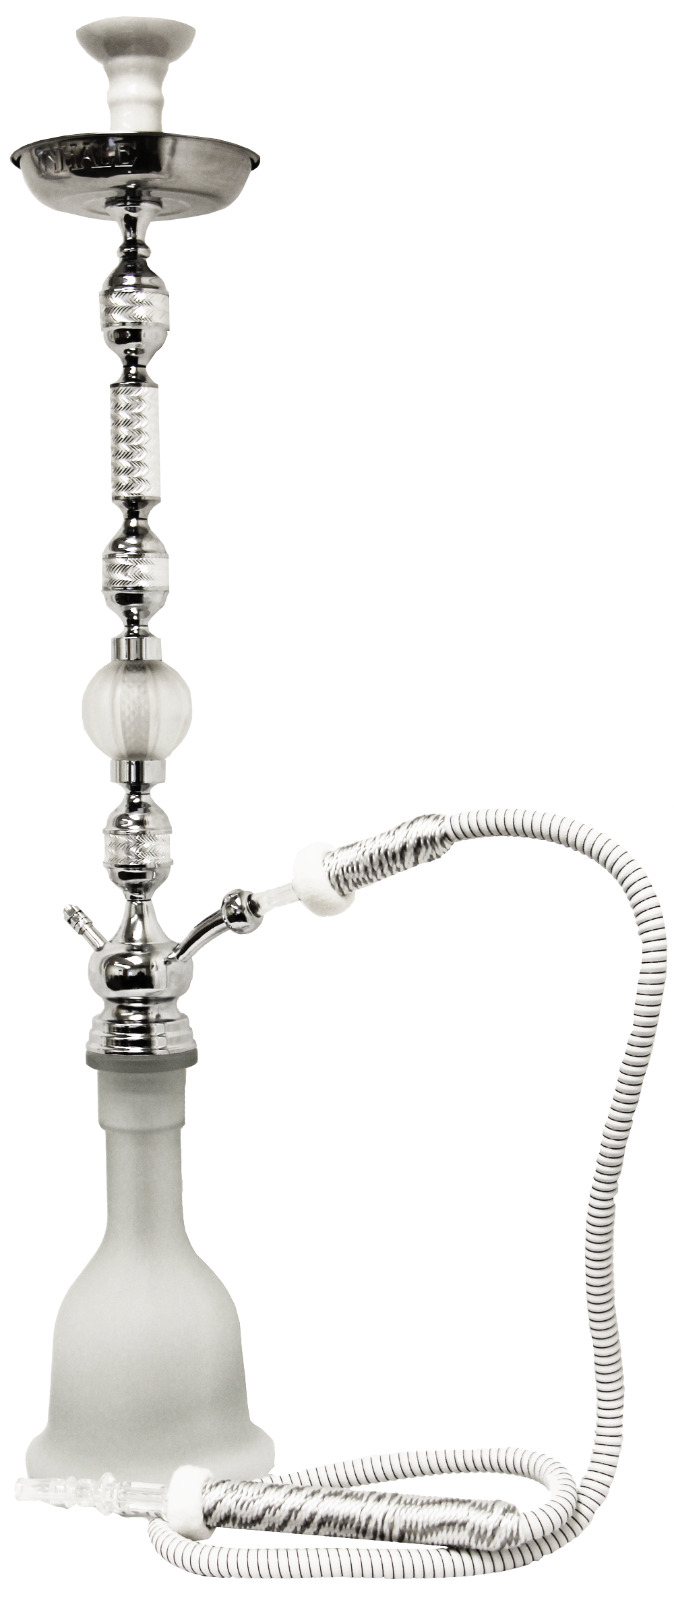 40 INCH INHALE (R) INDIA EGYPTIAN STYLE HOOKAH WITH A LARGE HOSE WHITE